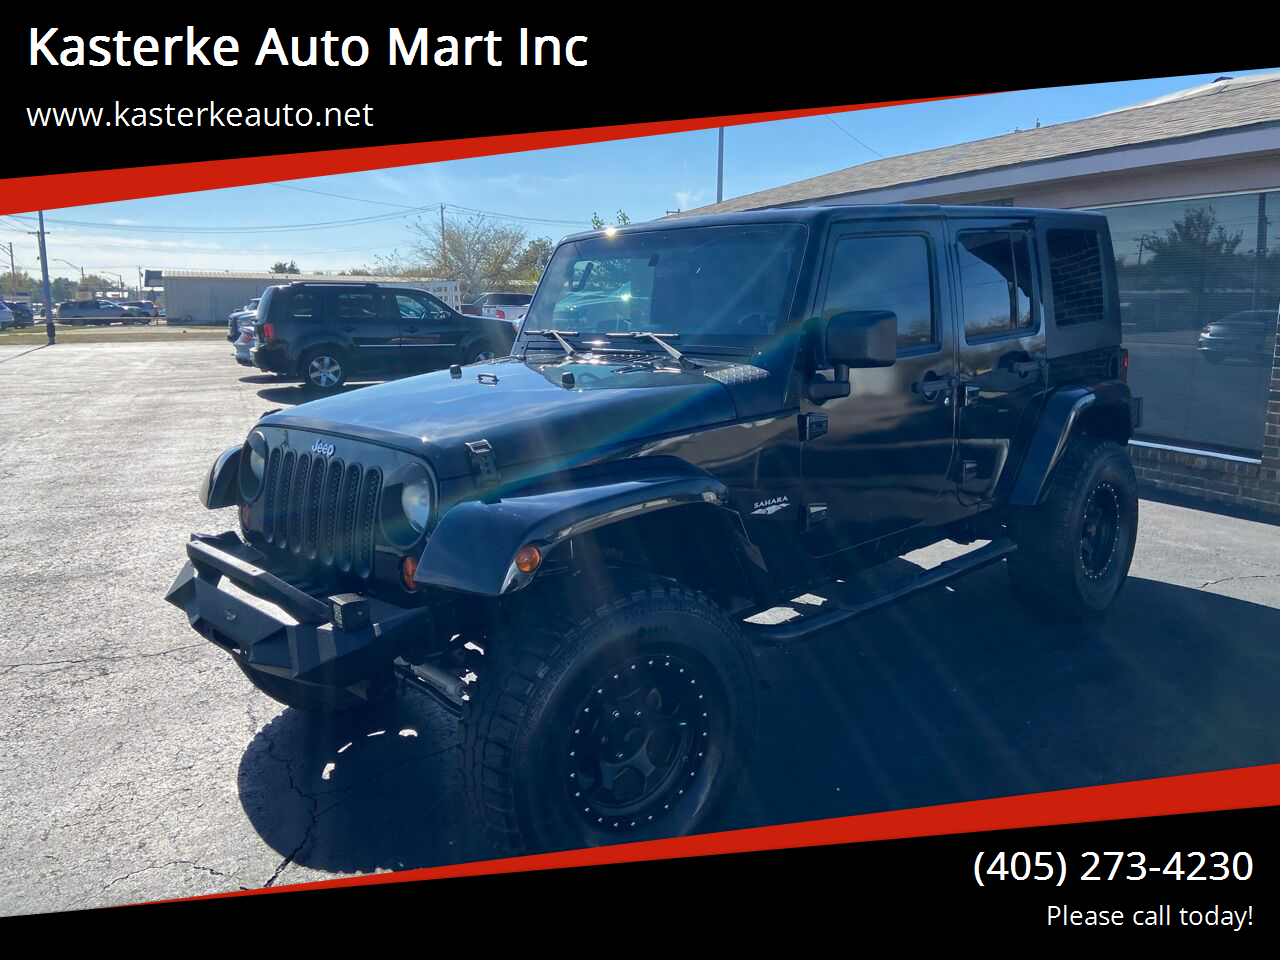 2009 Jeep Wrangler Unlimited For Sale In Aberdeen, SD ®